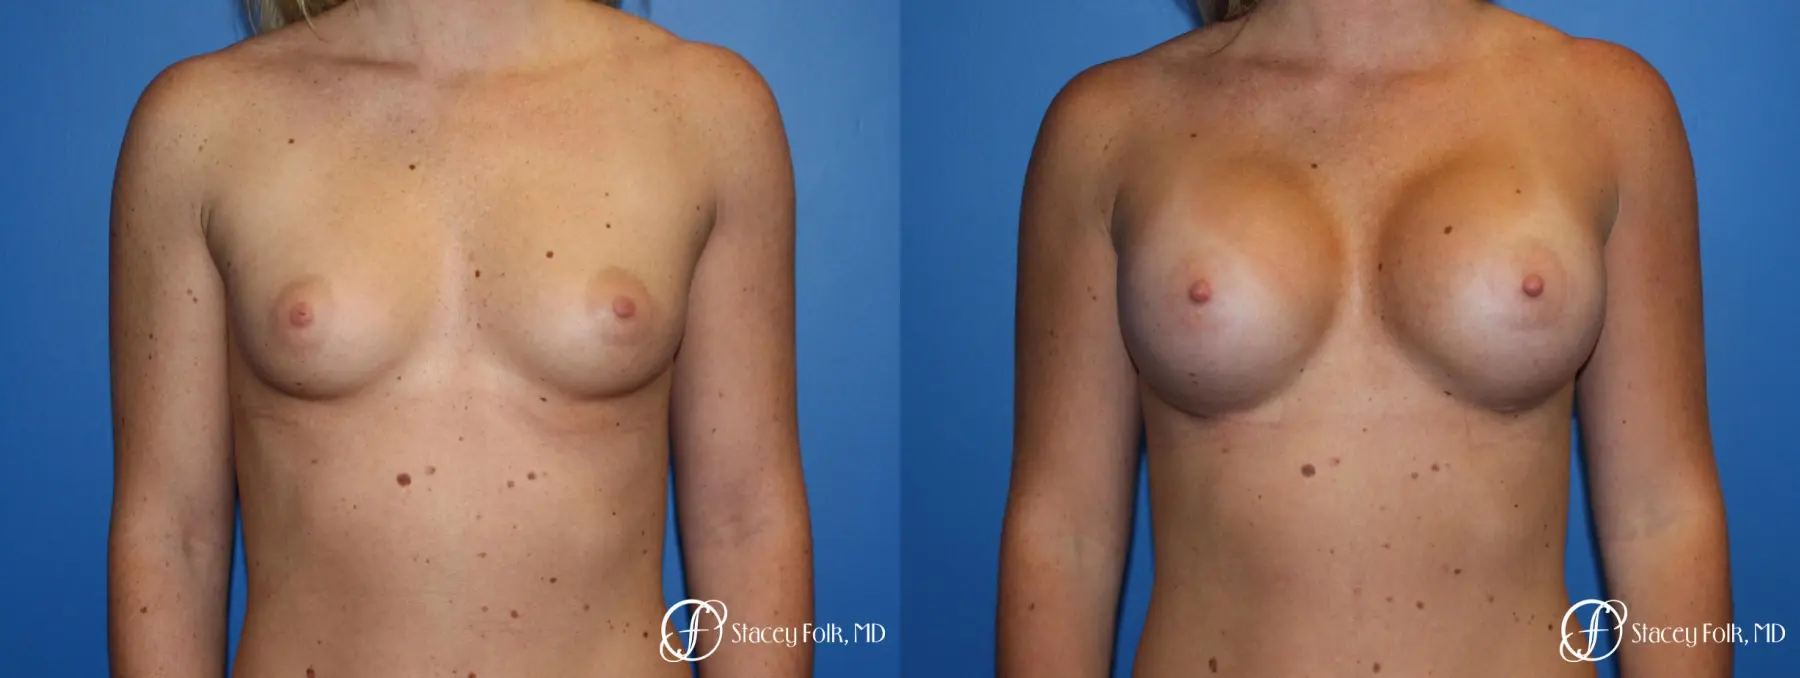 Breast Augmentation with Sientra Textured Implants - Before and After